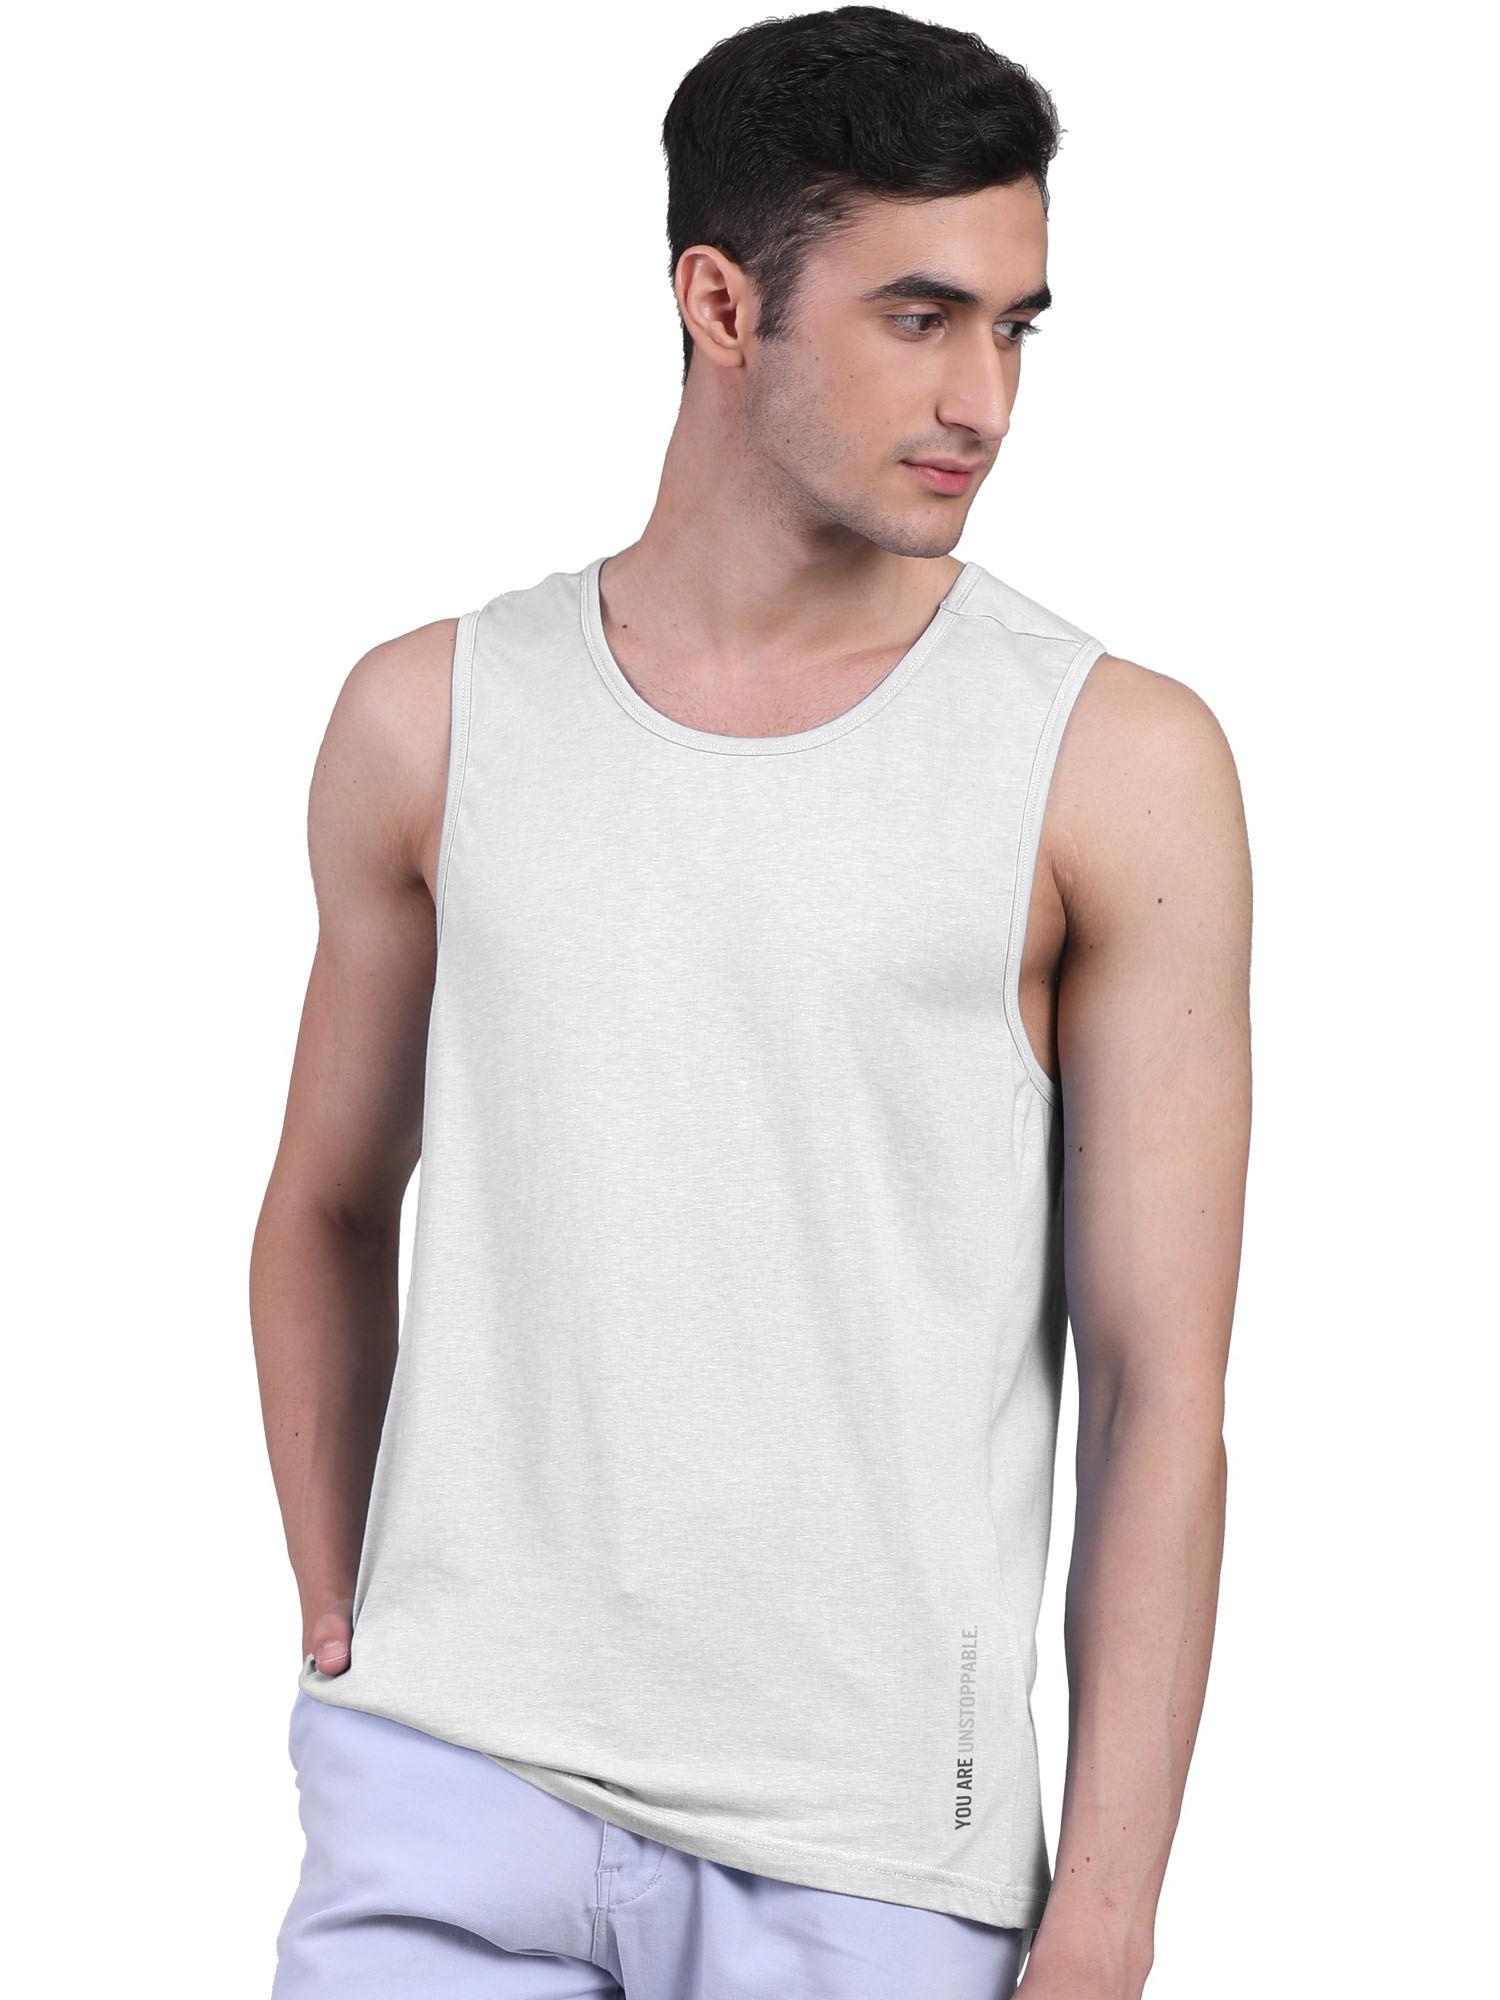 mens twin skin bamboo cotton anti microbial active vest white